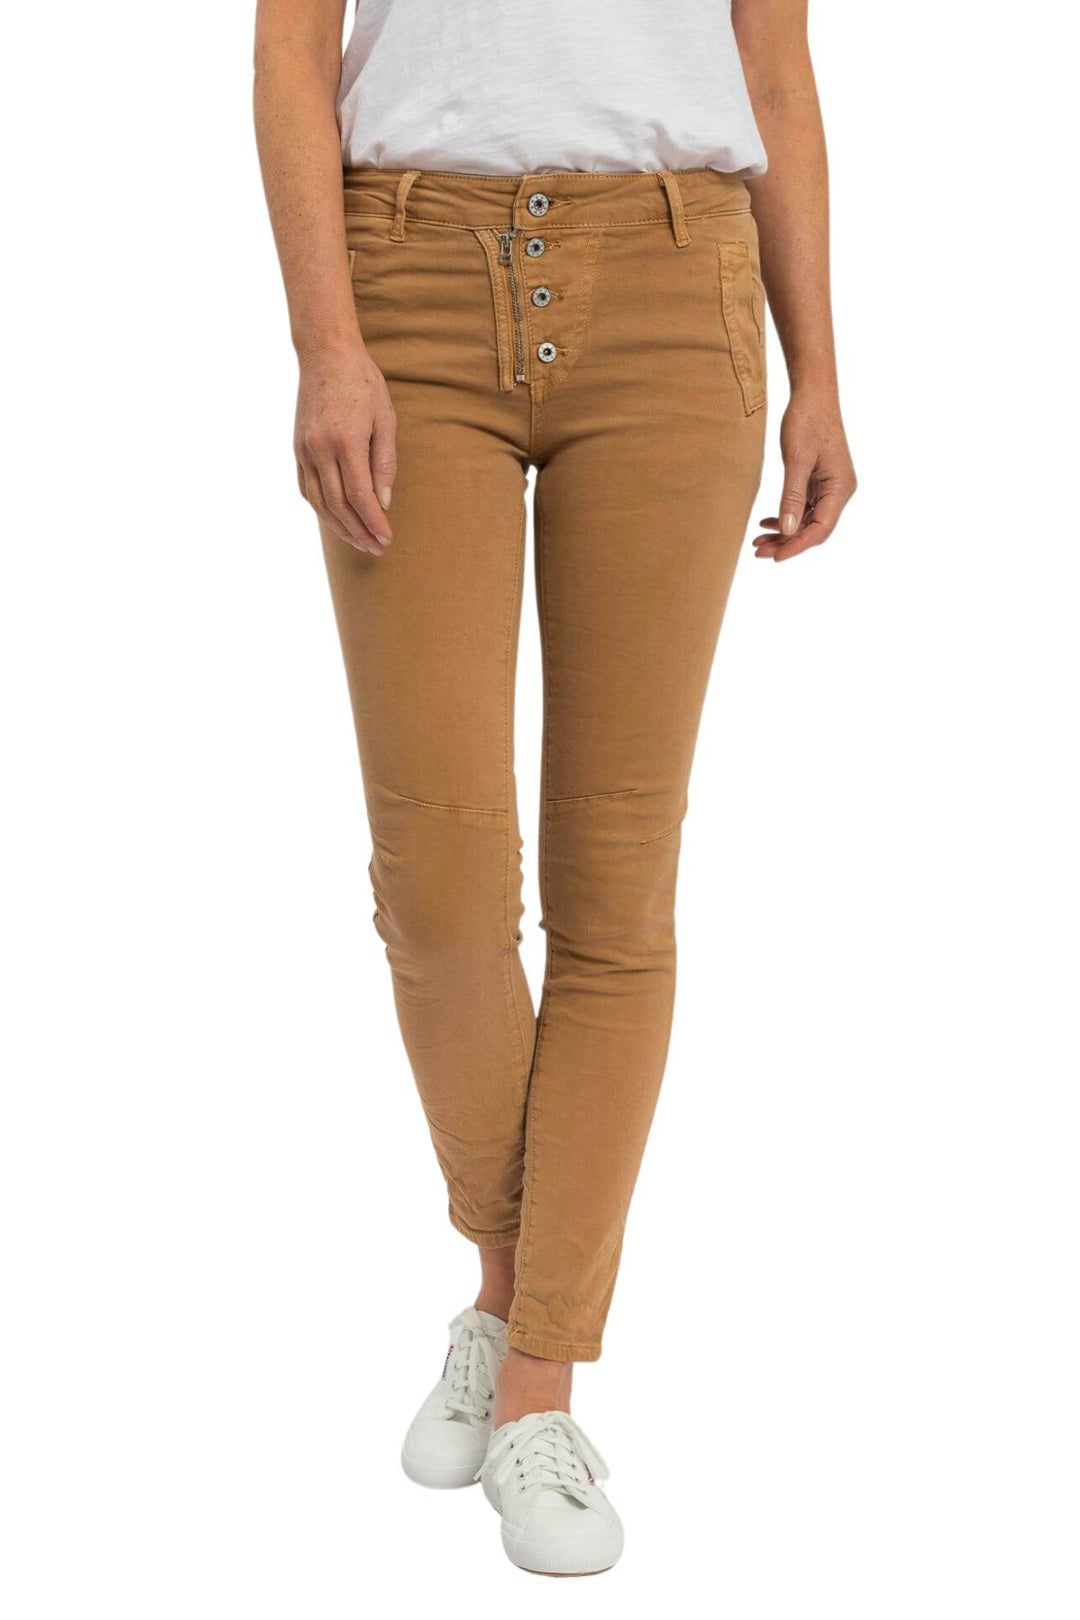 Make a statement with a difference wearing the Classic Button Jeans in biscotti by Italian Star. These jeans double as a casual and smart pant with an added touch of Pizazz through the zip and button detail. With a mid rise waist, pockets and tapered leg these pants are going to fit you to perfection!